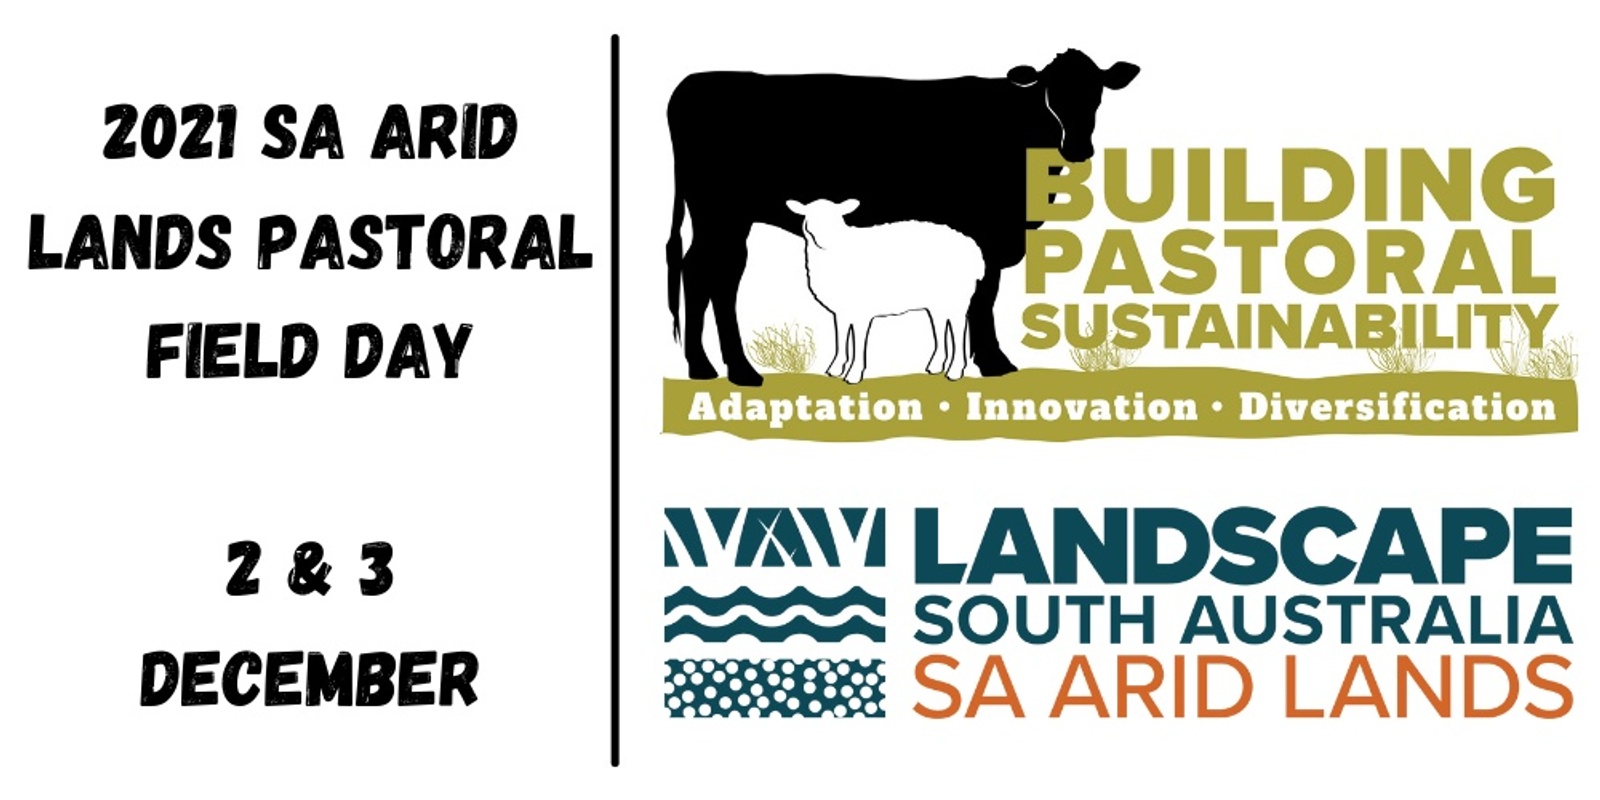 Banner image for SA Arid Lands Pastoral Field Day 2021